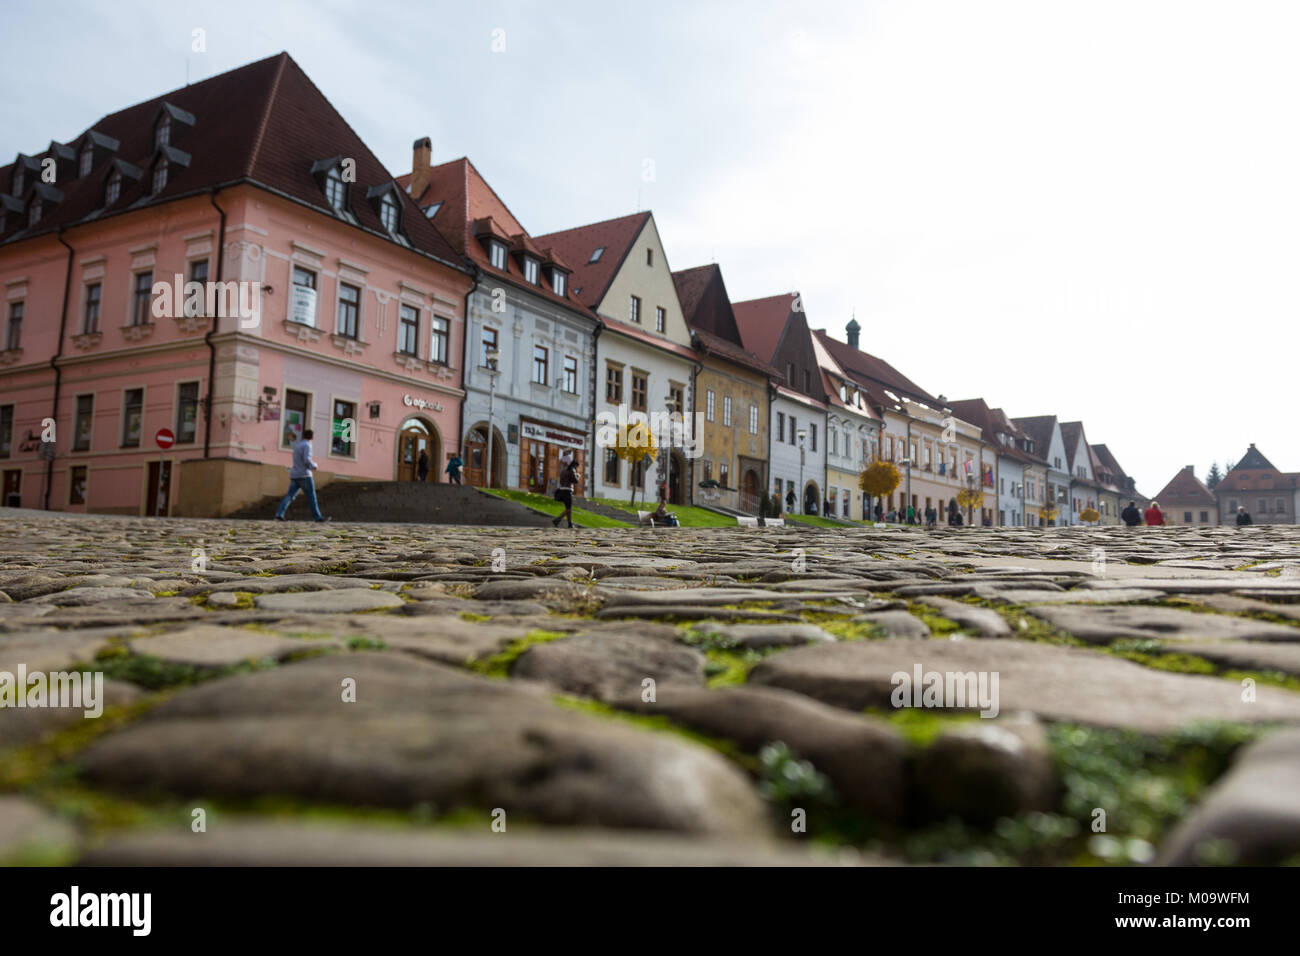 BARDEJOV, SLOVAKIA - November 7, 2014: Autumn  view of old town market square  with gothic Basilica of St. Giles, view from pavement stones,  in Barde Stock Photo